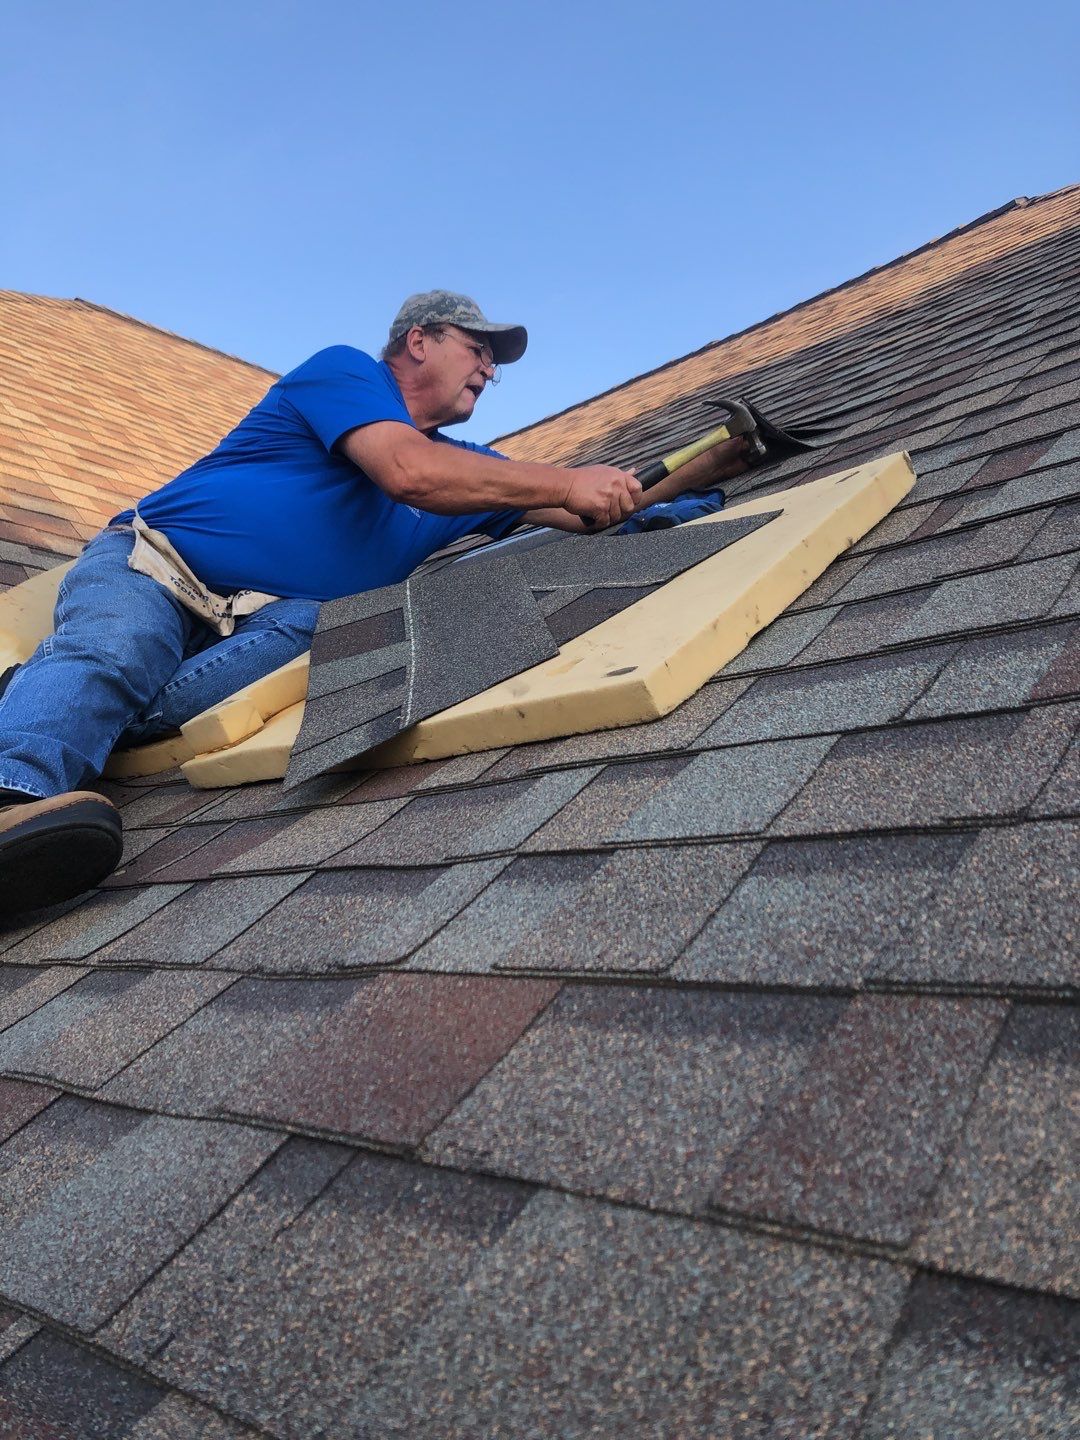 tulsa roofing contractor owner